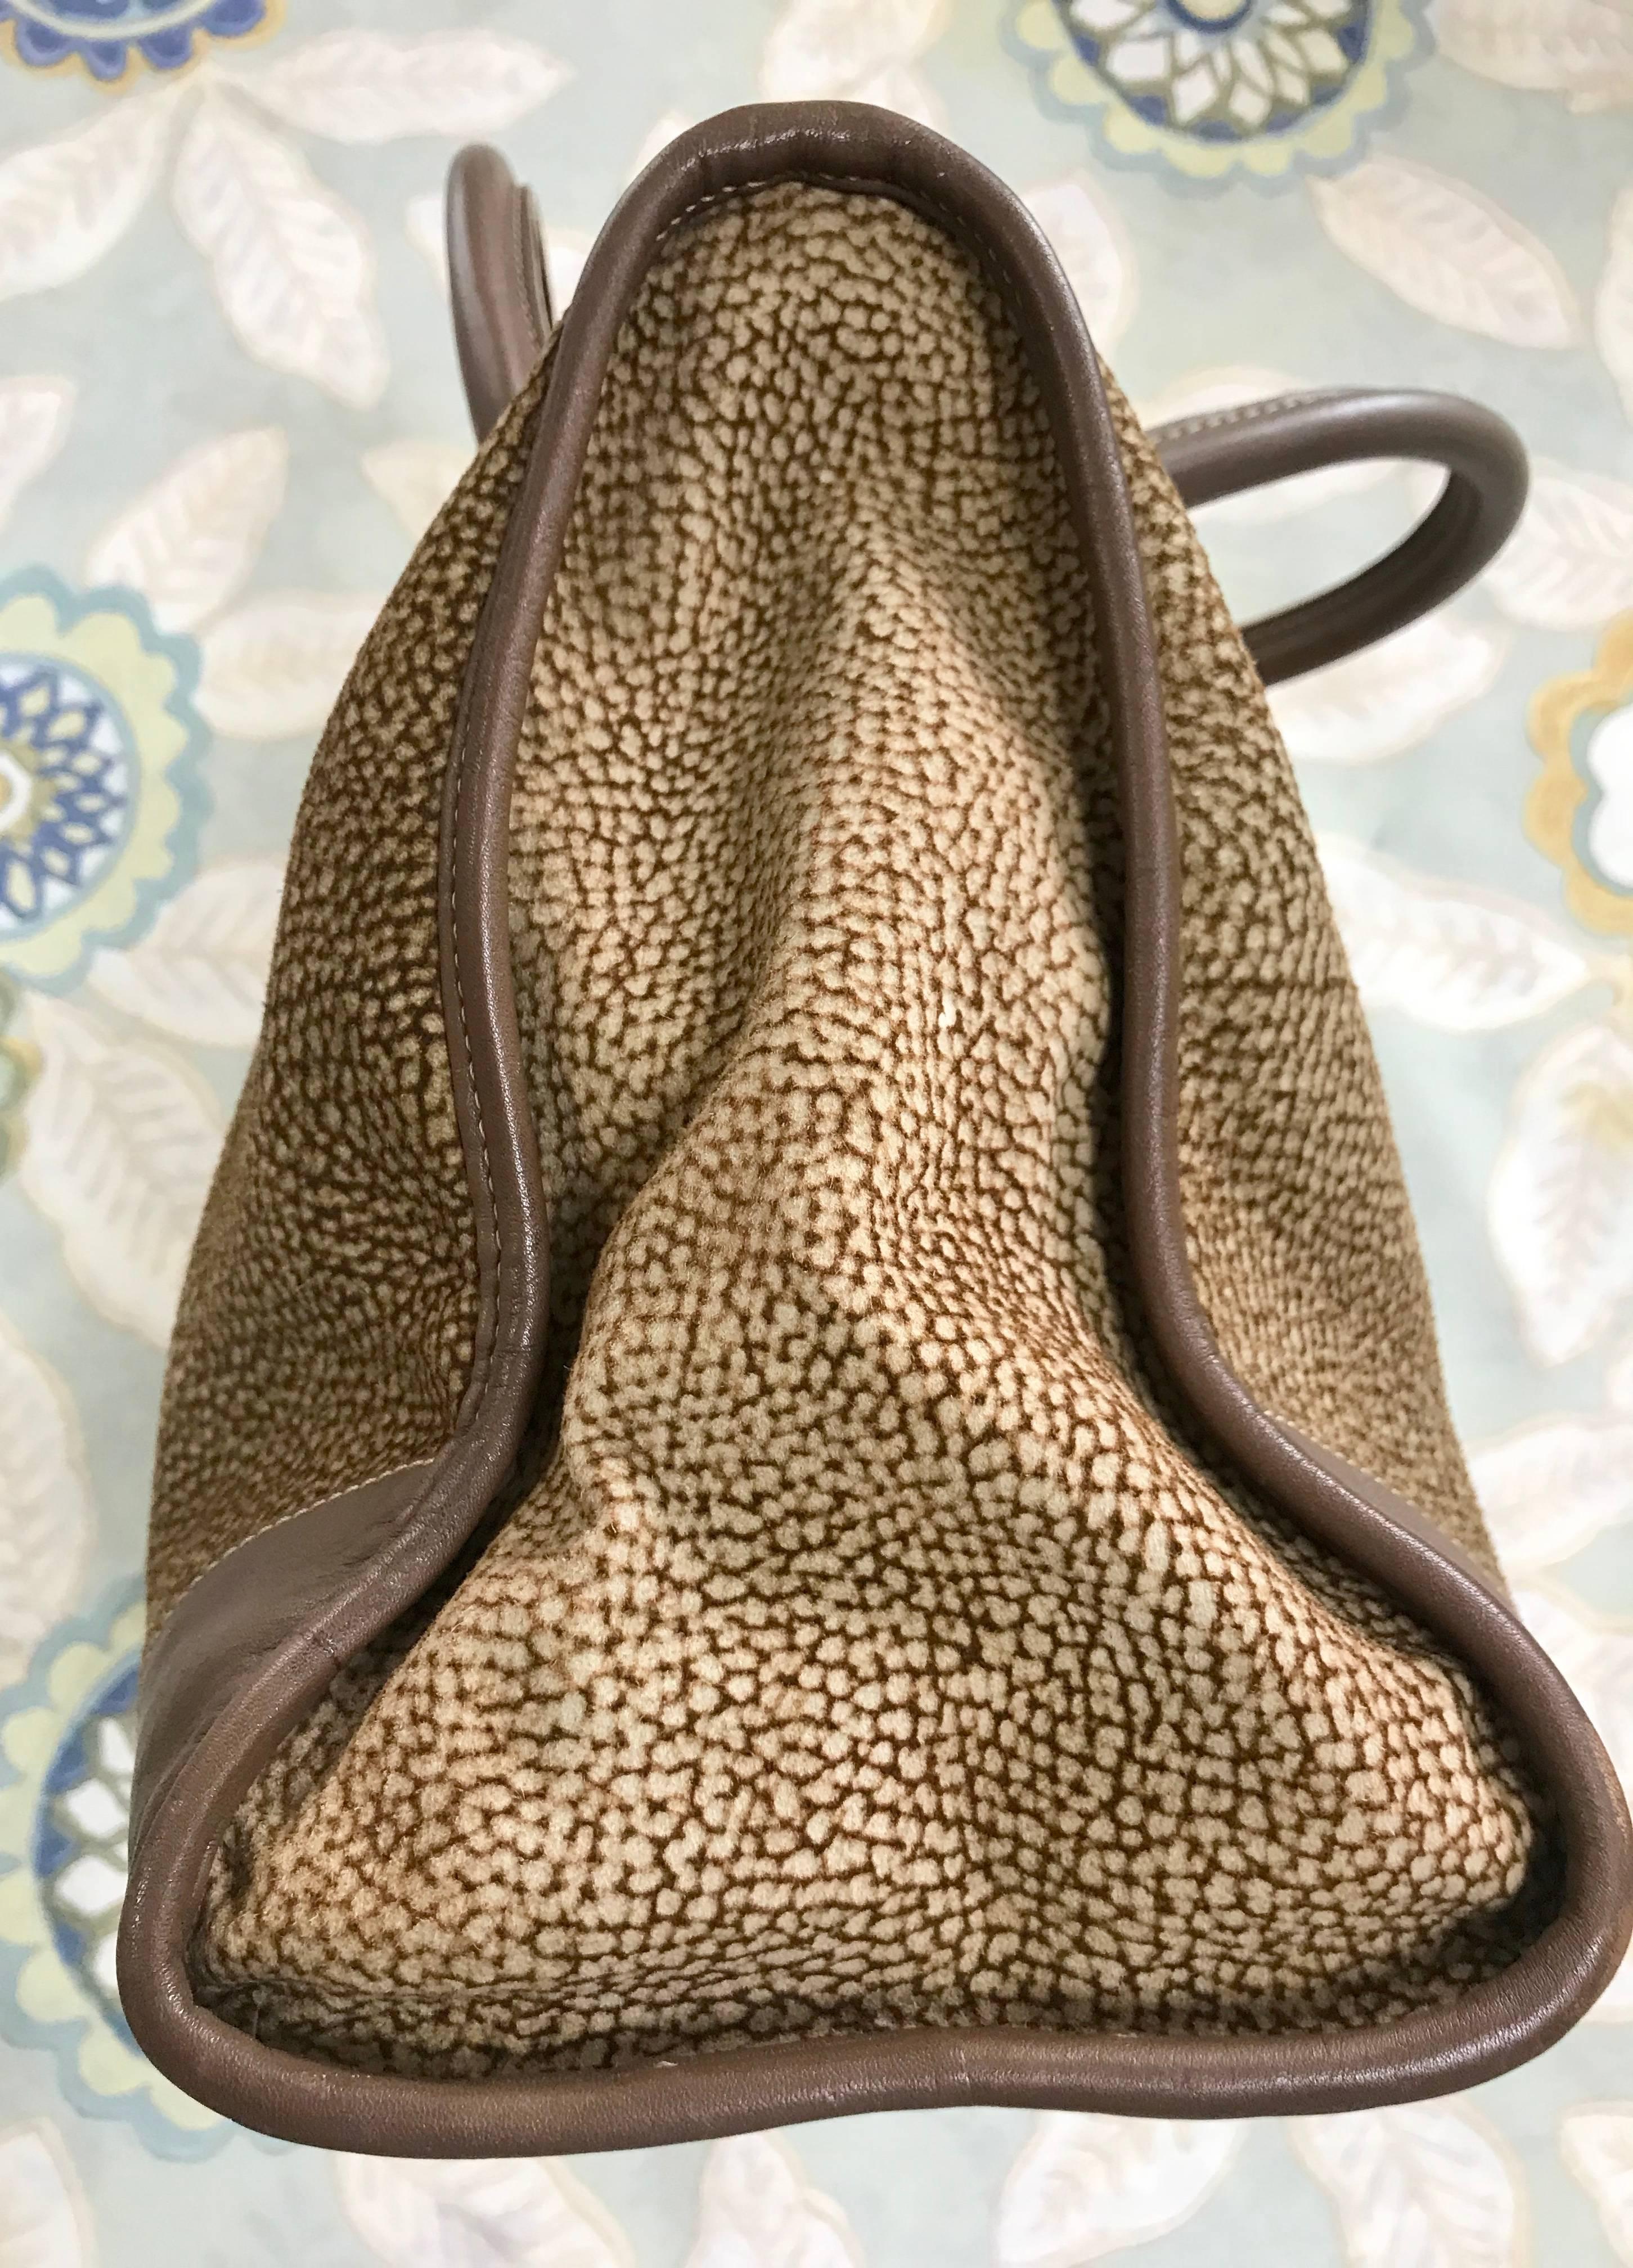 Redwall Vintage Borbonese brown and beige leather bag  In Good Condition For Sale In Kashiwa, Chiba